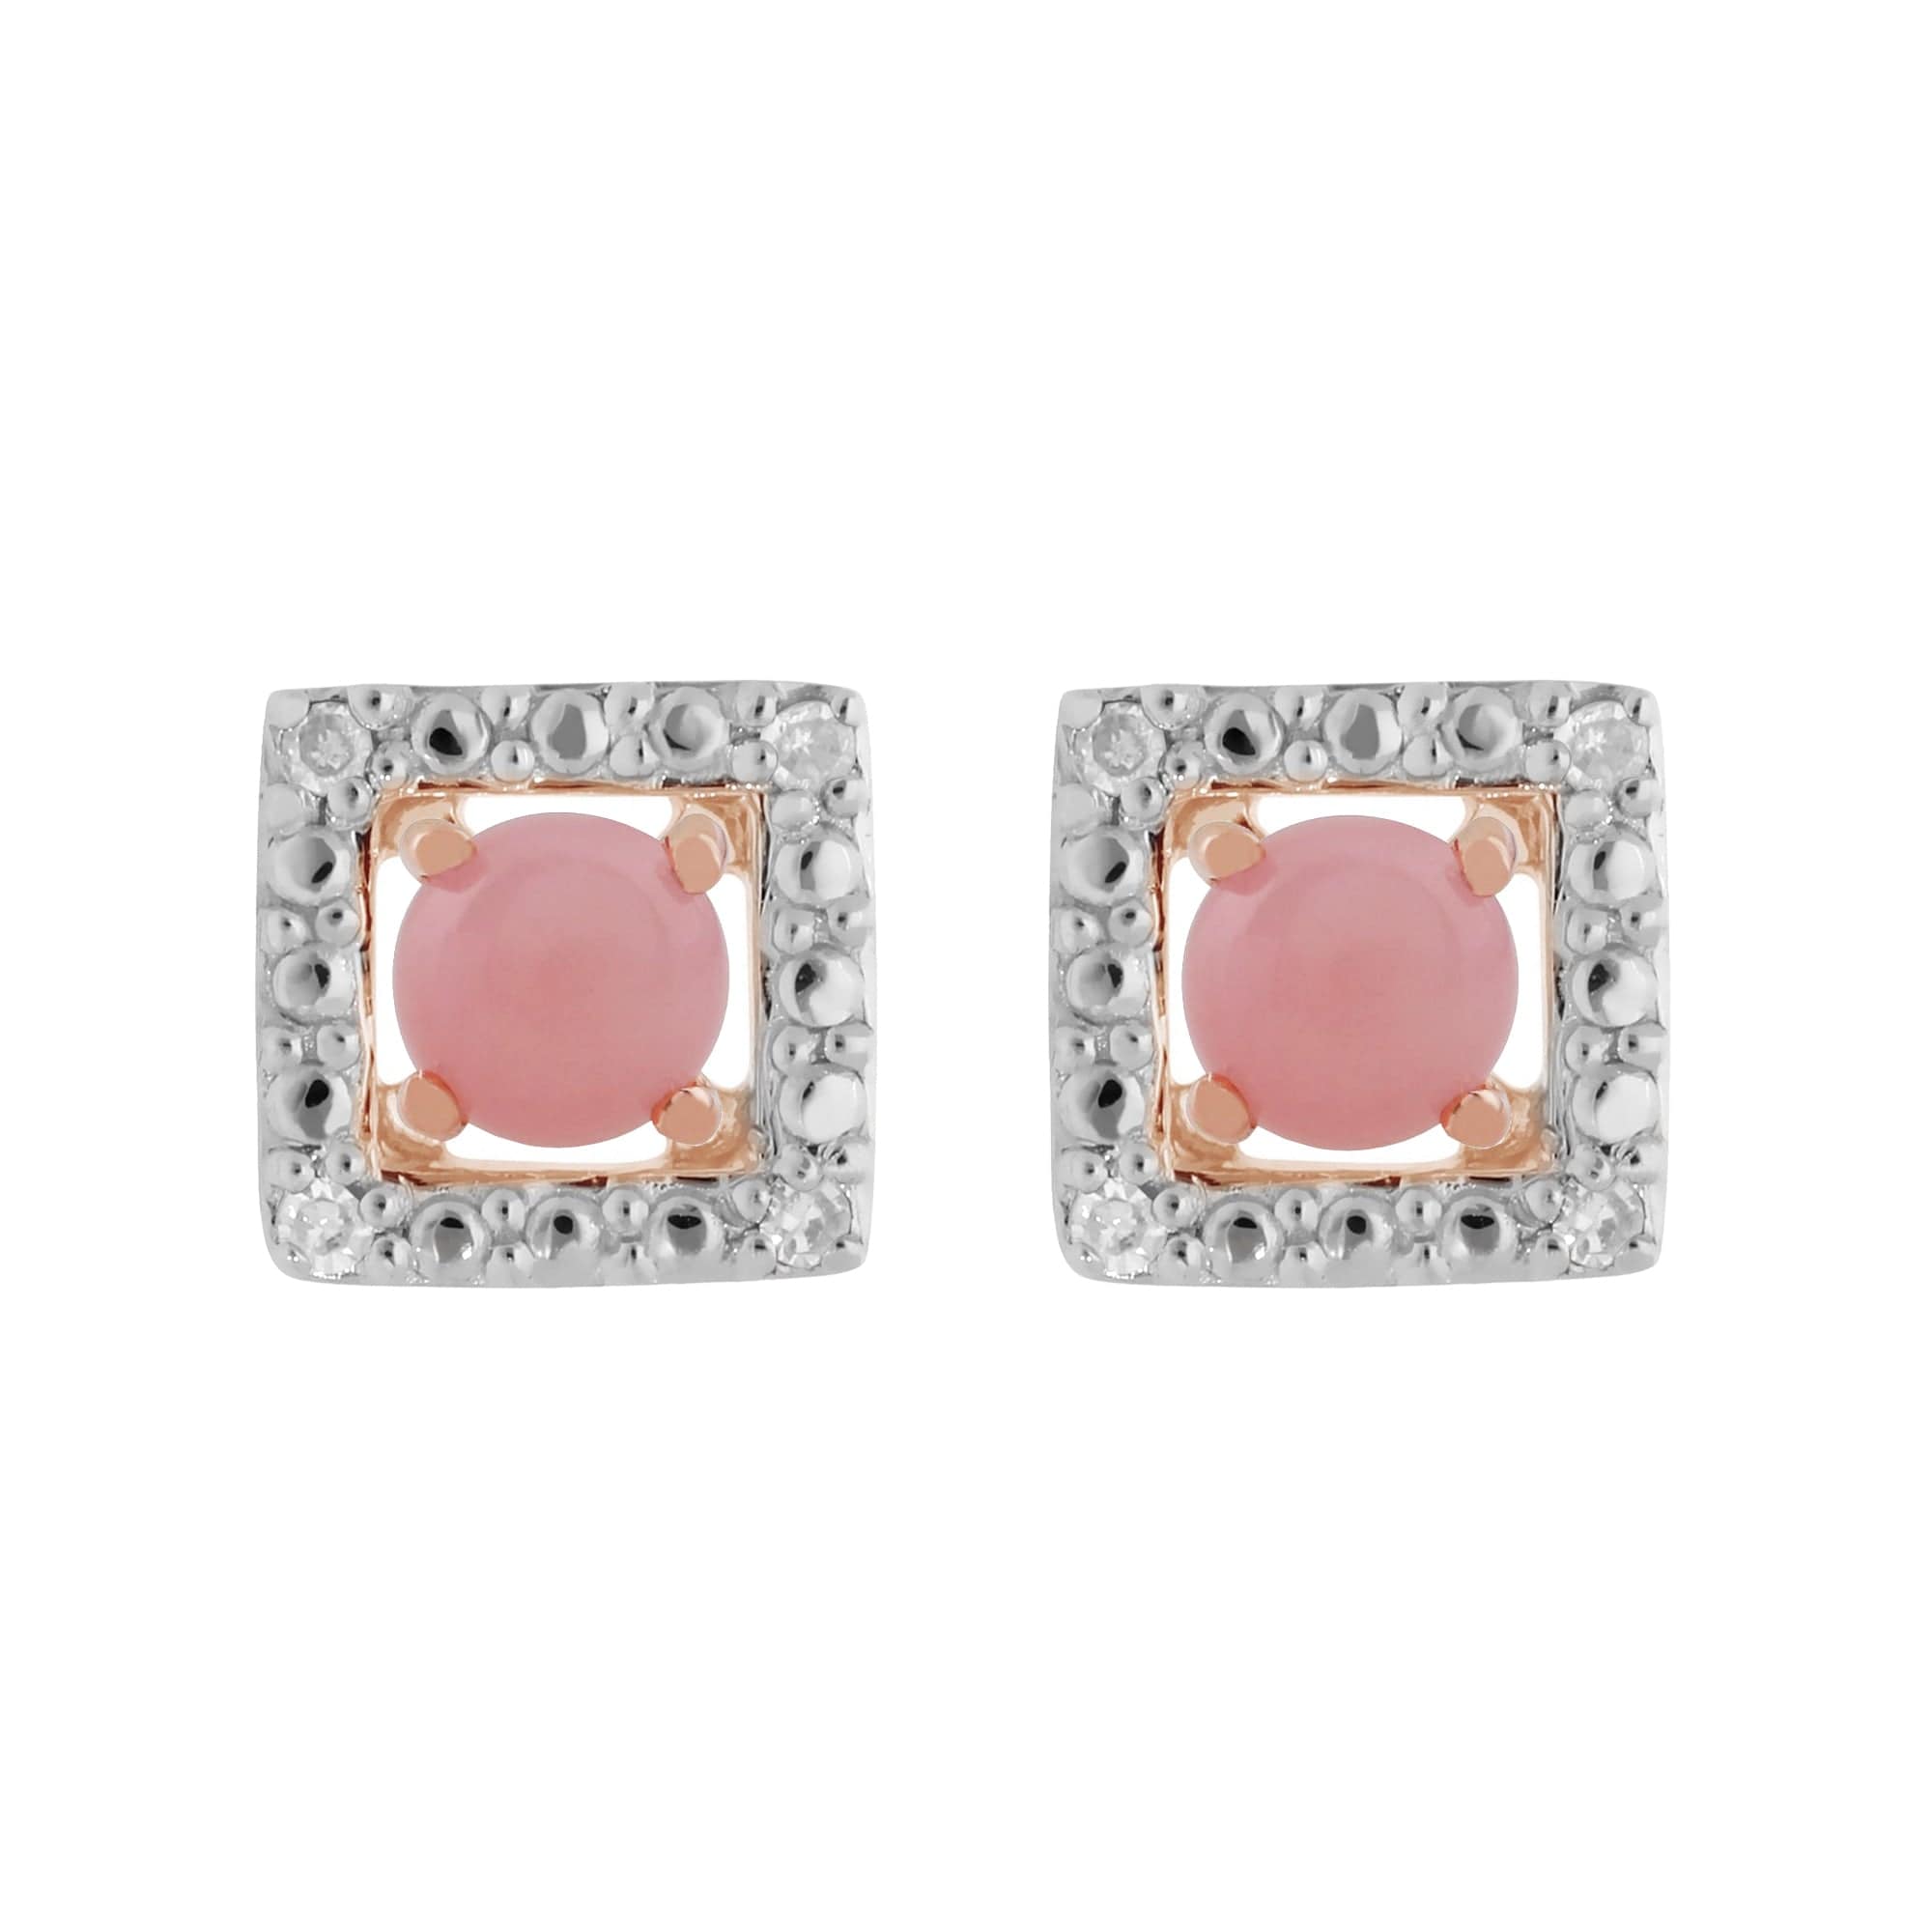 183E4316039-191E0380019 Classic Round Pink Opal Stud Earrings with Detachable Diamond Square Ear Jacket in 9ct Rose Gold 1